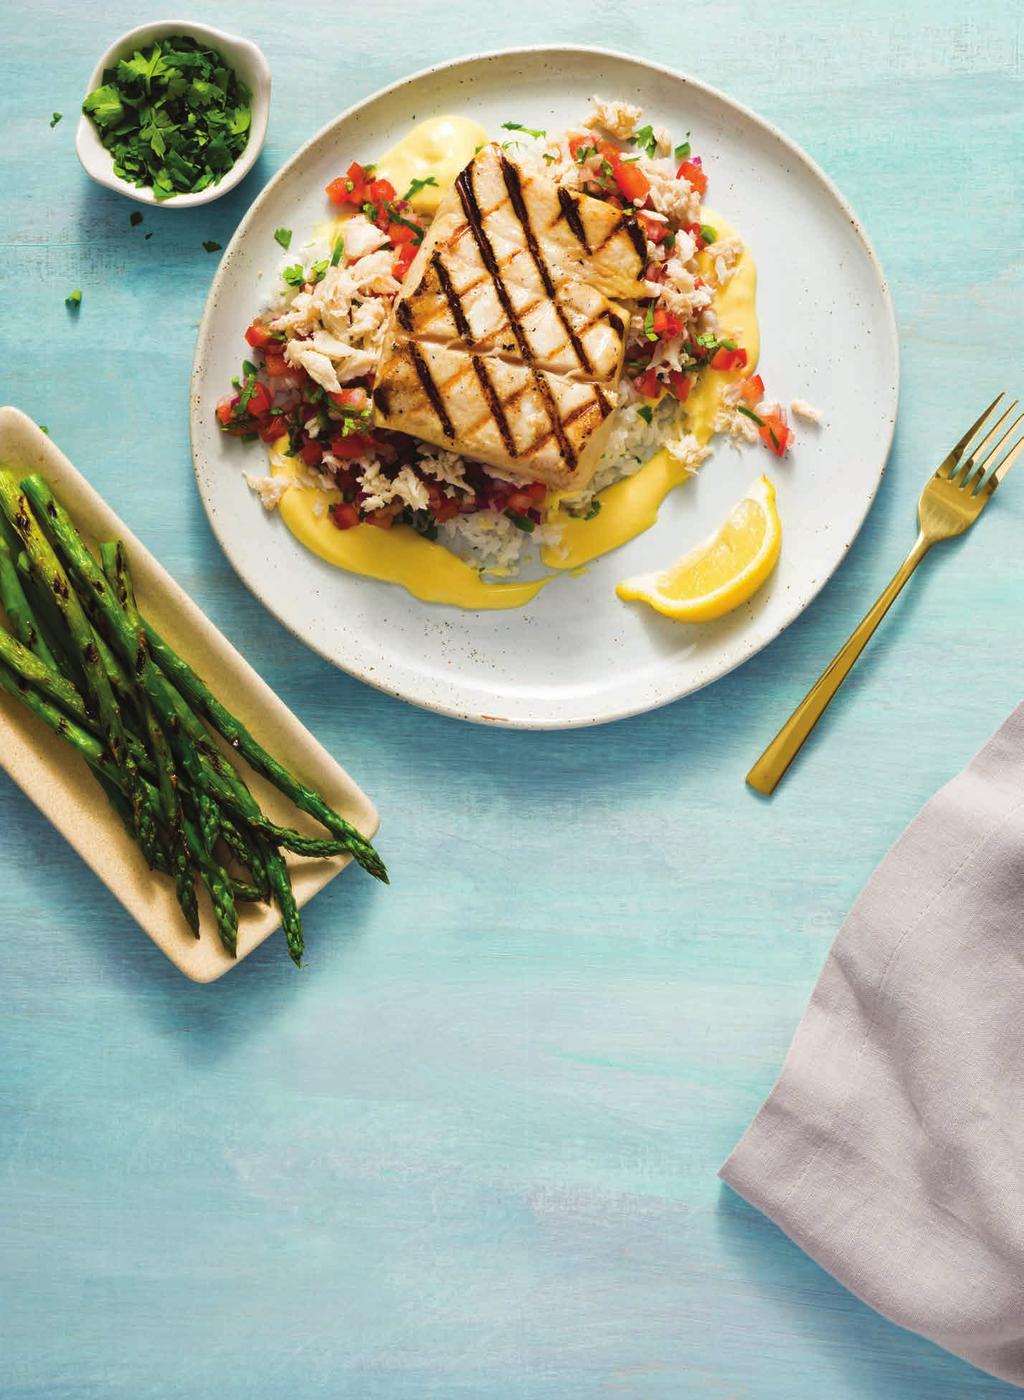 99 NEW SEARED OR GRILLED HALIBUT * Served with lump crab pico de gallo, our rich lemon butter sauce, cilantro jasmine rice, and seasonal vegetables. / 25.